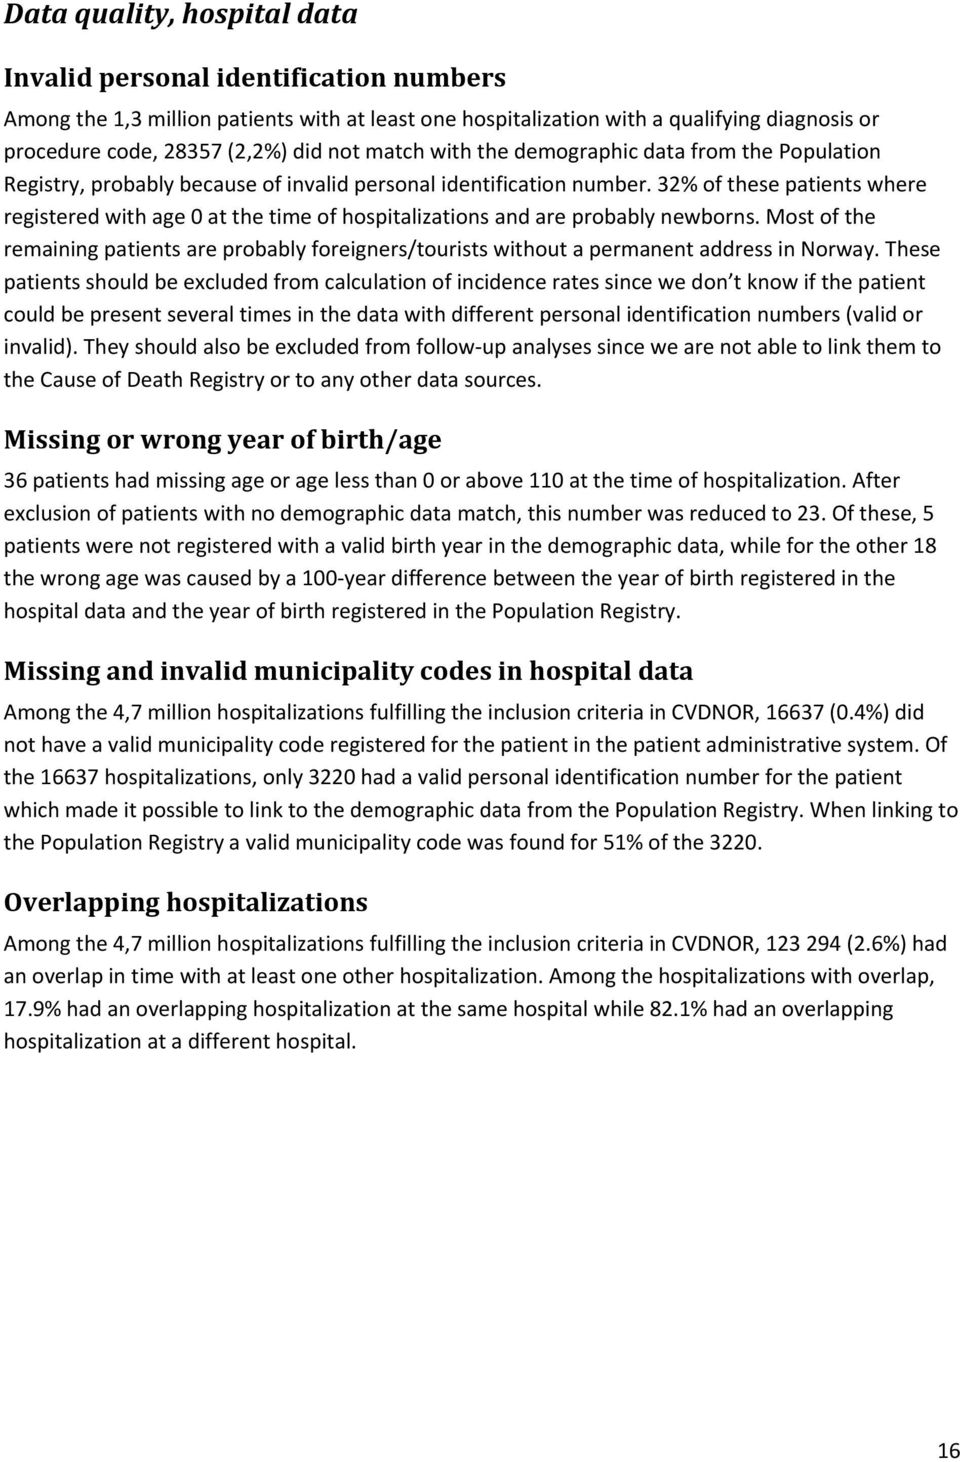 32% of these patients where registered with age at the time of hospitalizations and are probably newborns.